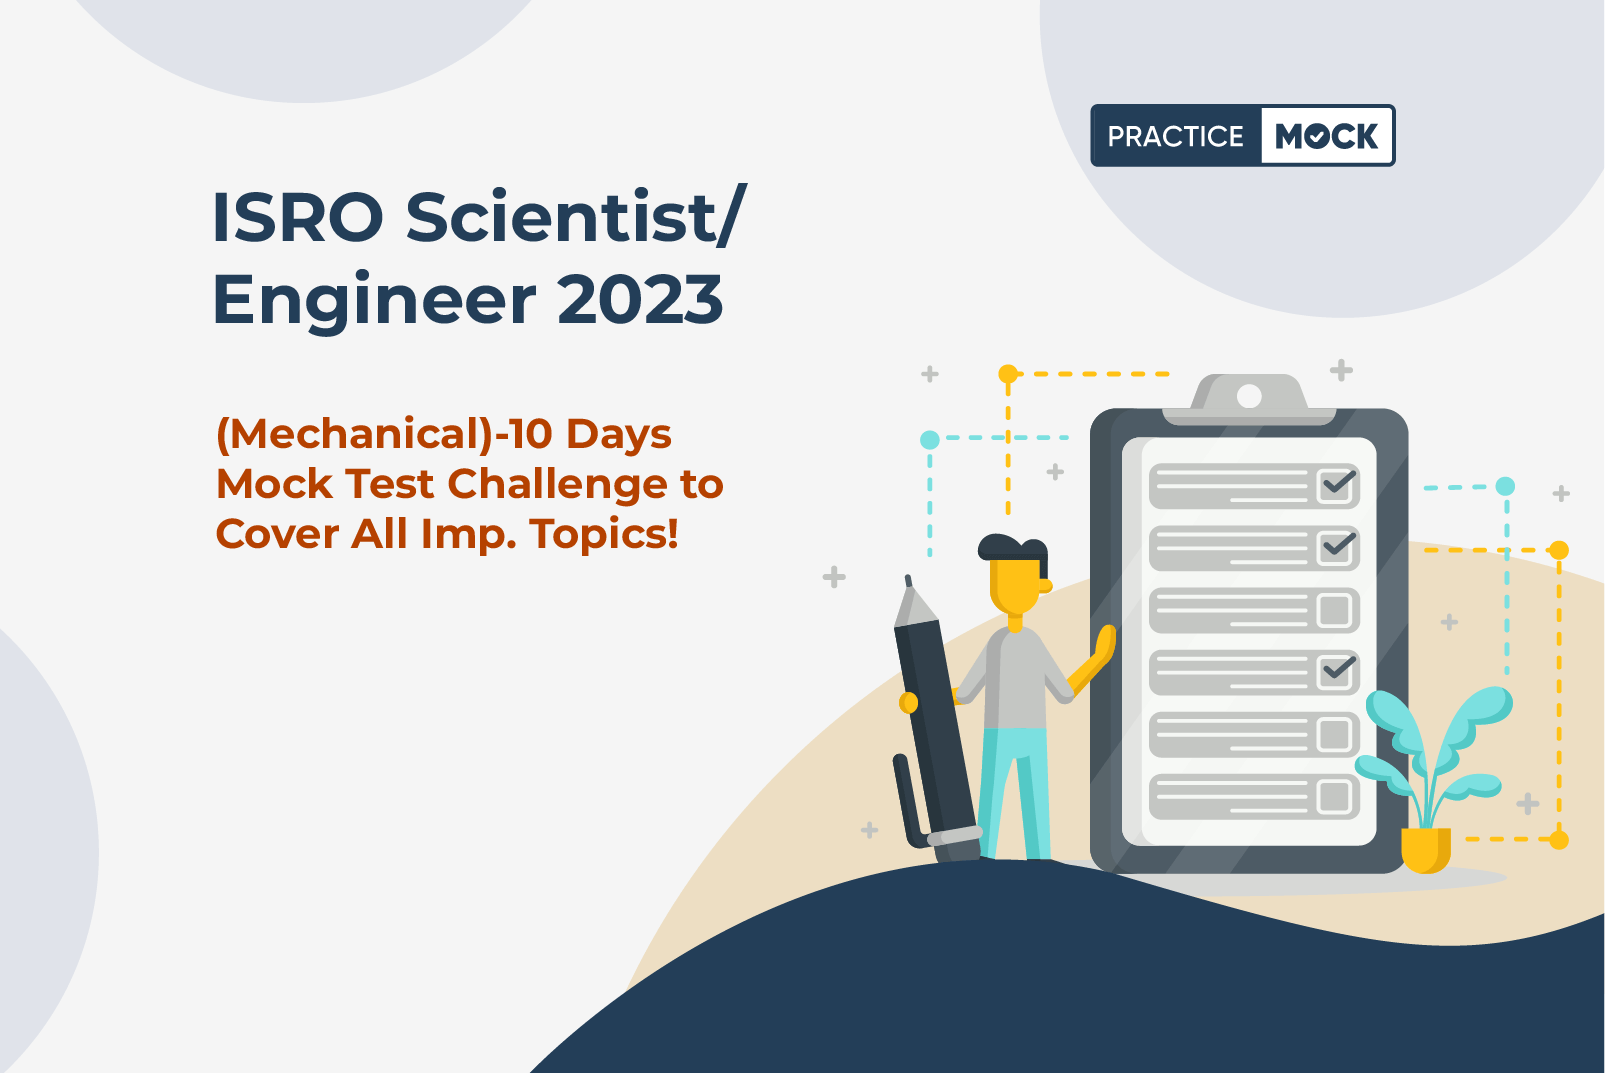 ISRO Scientist/Engineer 2023 (Mechanical)-10 Days Mock Test Challenge to Cover All Imp. Topics!